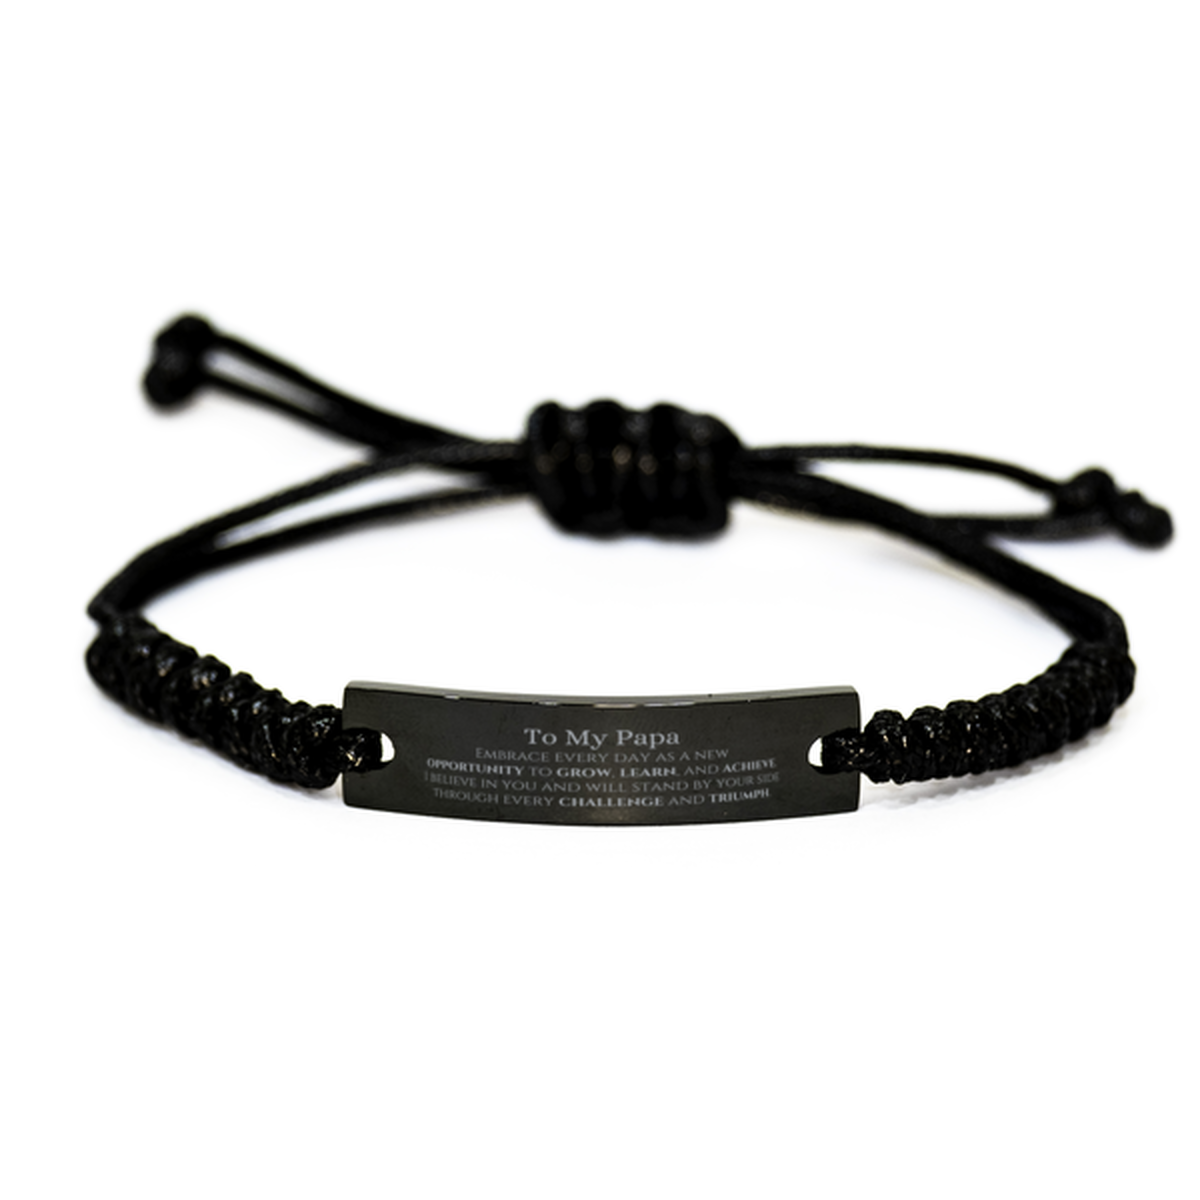 To My Papa Gifts, I believe in you and will stand by your side, Inspirational Black Rope Bracelet For Papa, Birthday Christmas Motivational Papa Gifts